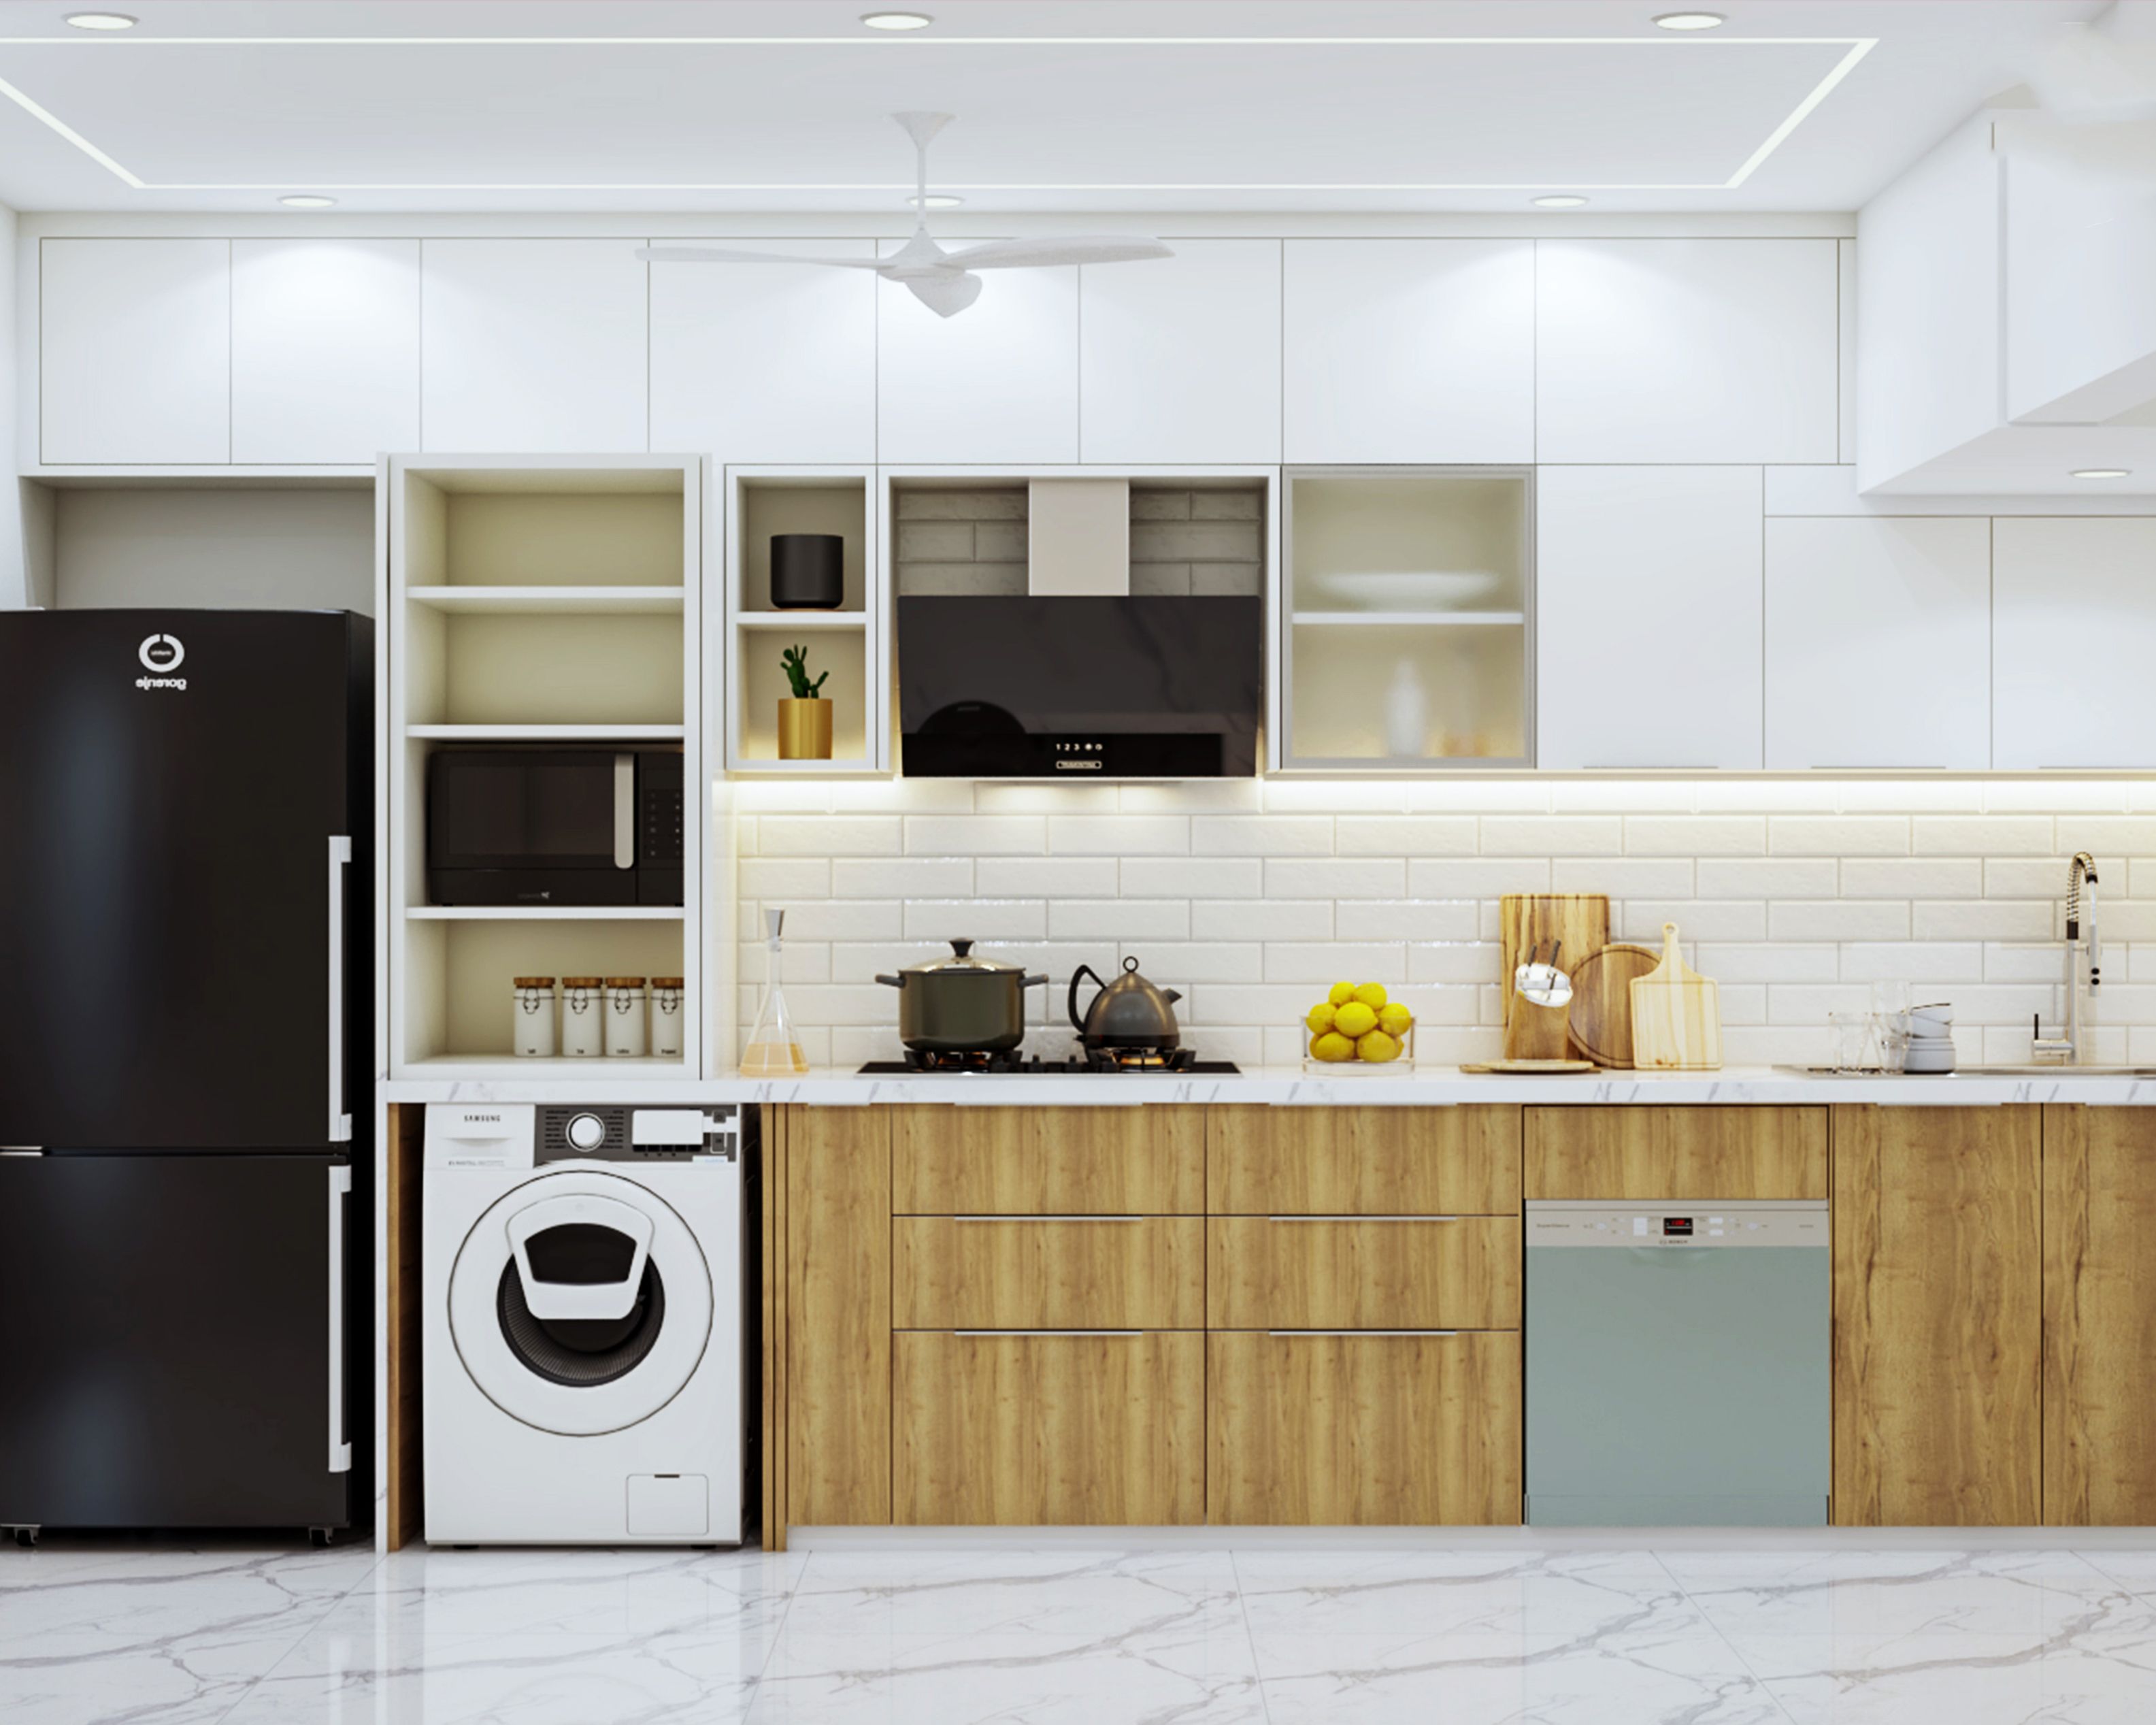 Contemporary Open Kitchen Design With Light Wooden Storage Units